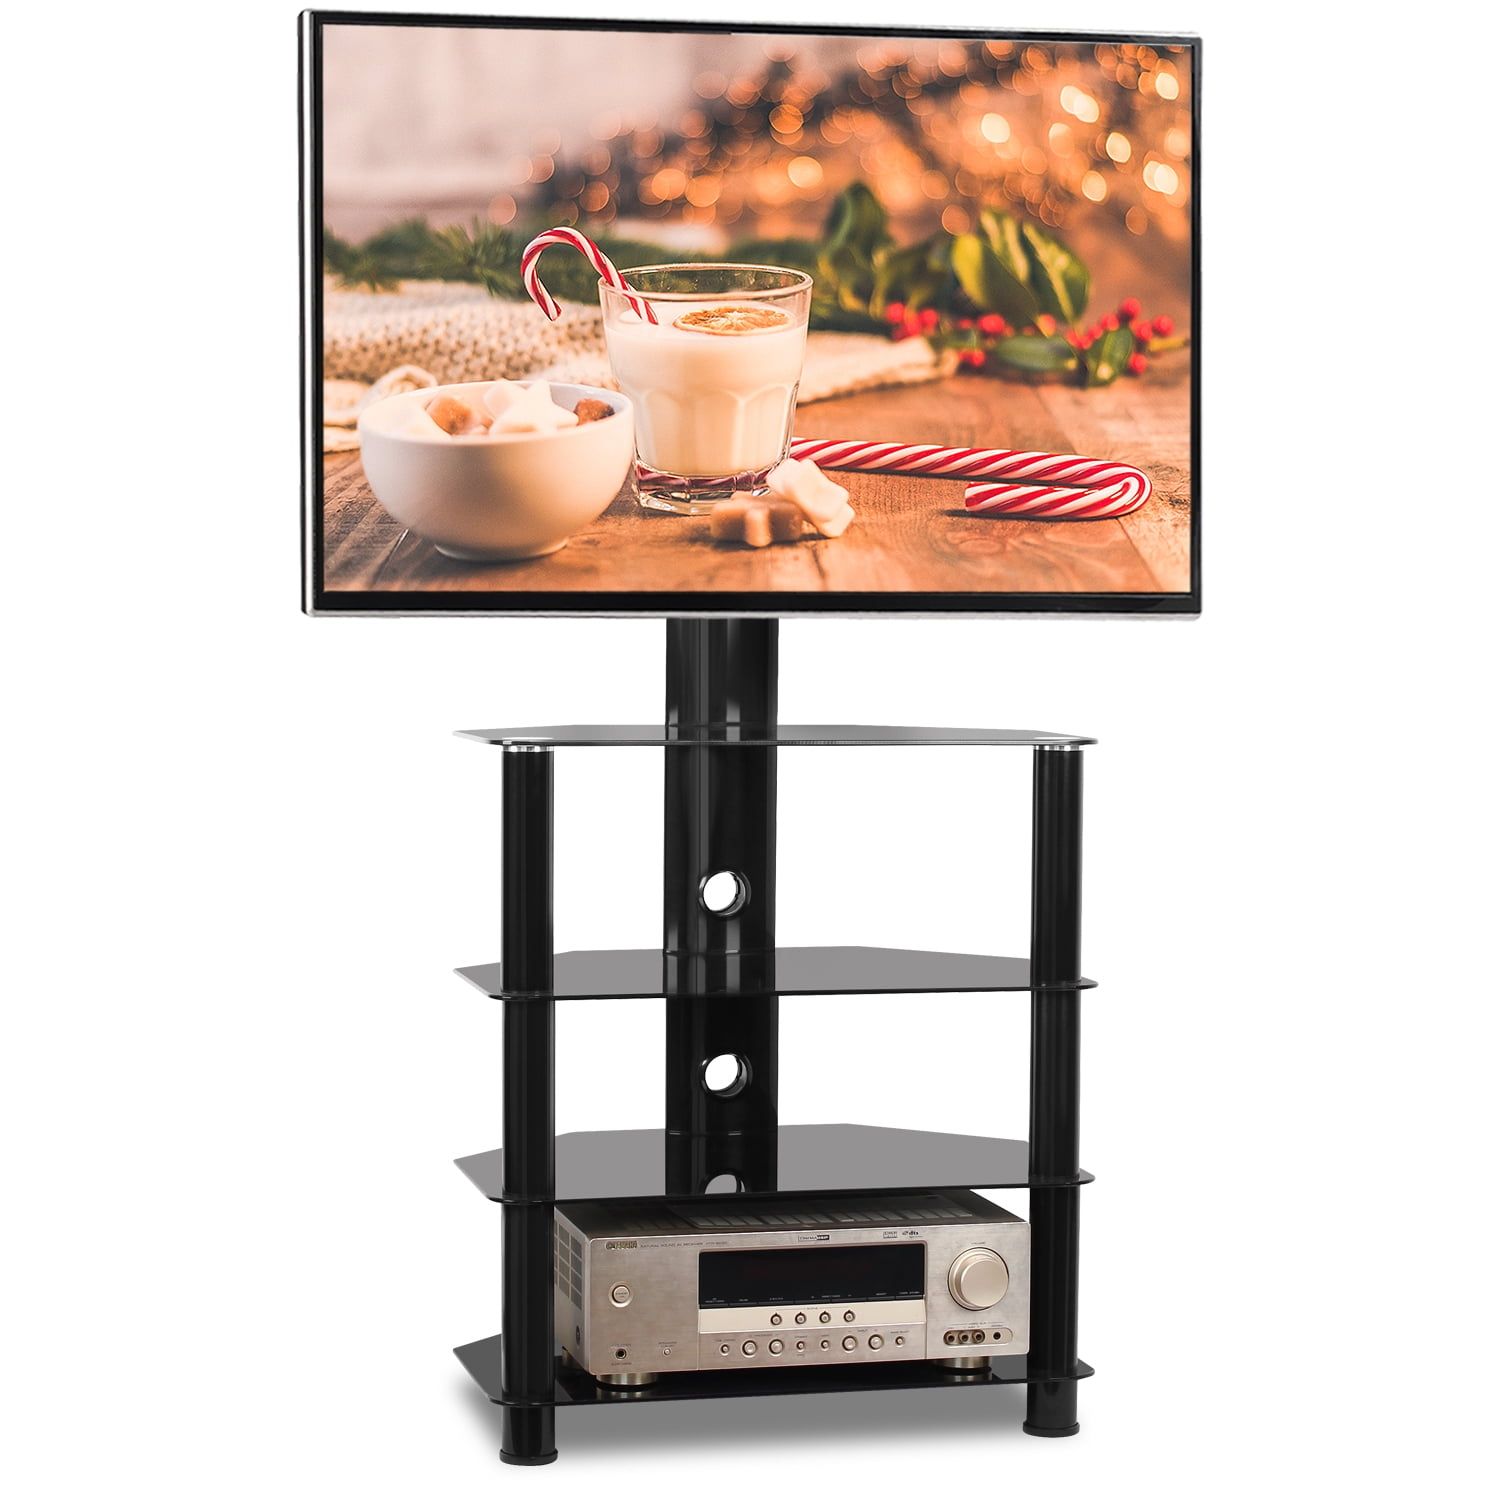 Modern Floor Black Glass Tv Stand For 32" 55" Flat Screen Lcd Led Tvs Throughout Top Shelf Mount Tv Stands (Gallery 16 of 20)